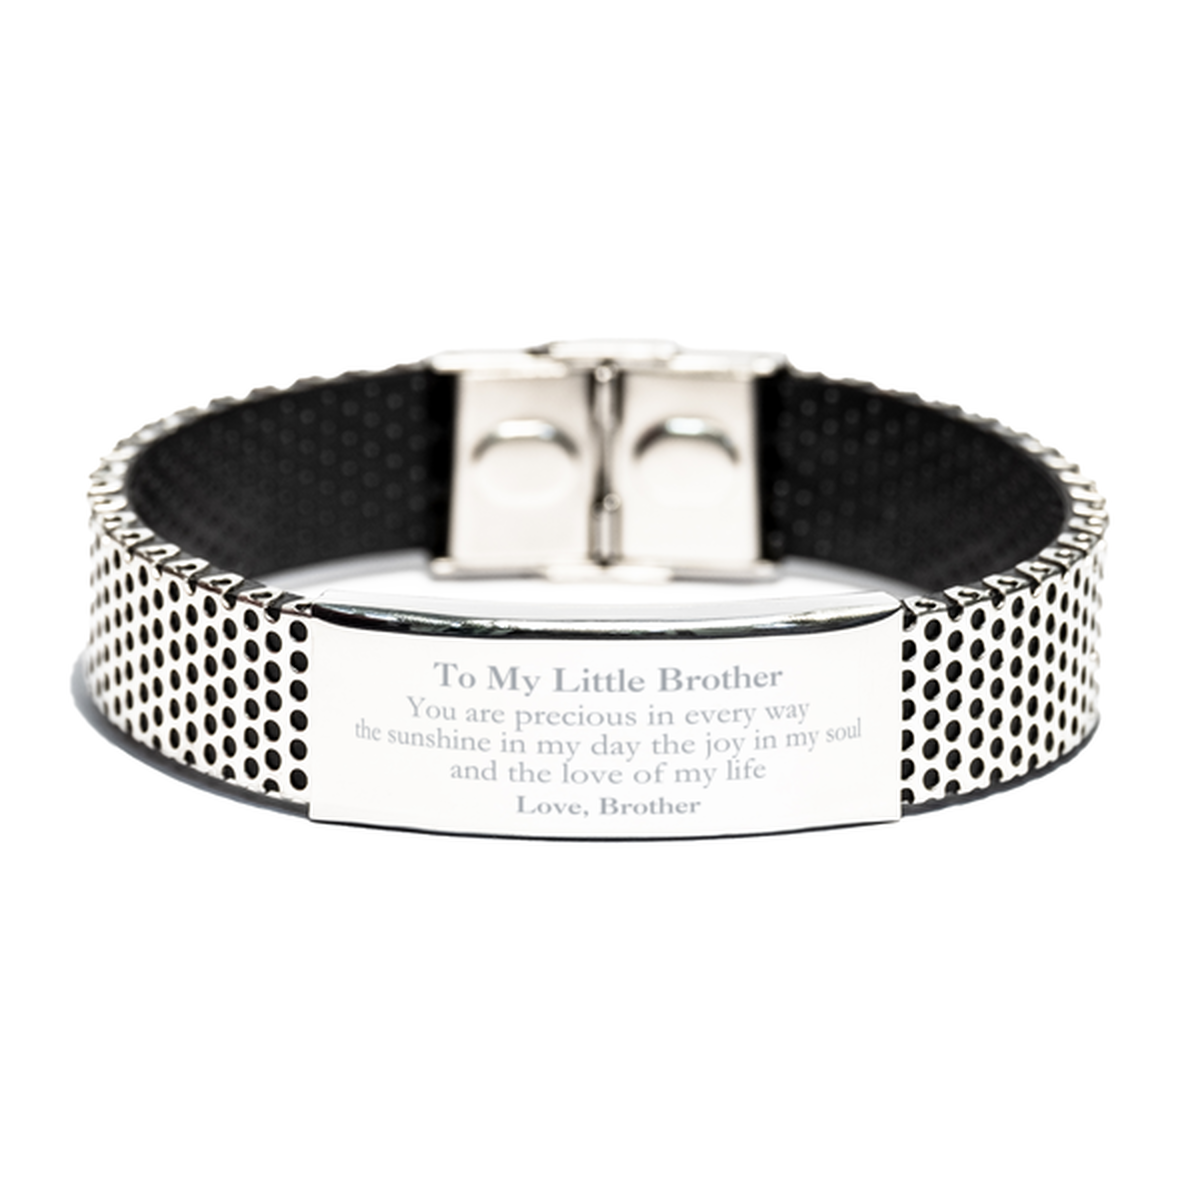 Graduation Gifts for Little Brother Stainless Steel Bracelet Present from Brother, Christmas Little Brother Birthday Gifts Little Brother You are precious in every way the sunshine in my day. Love, Brother